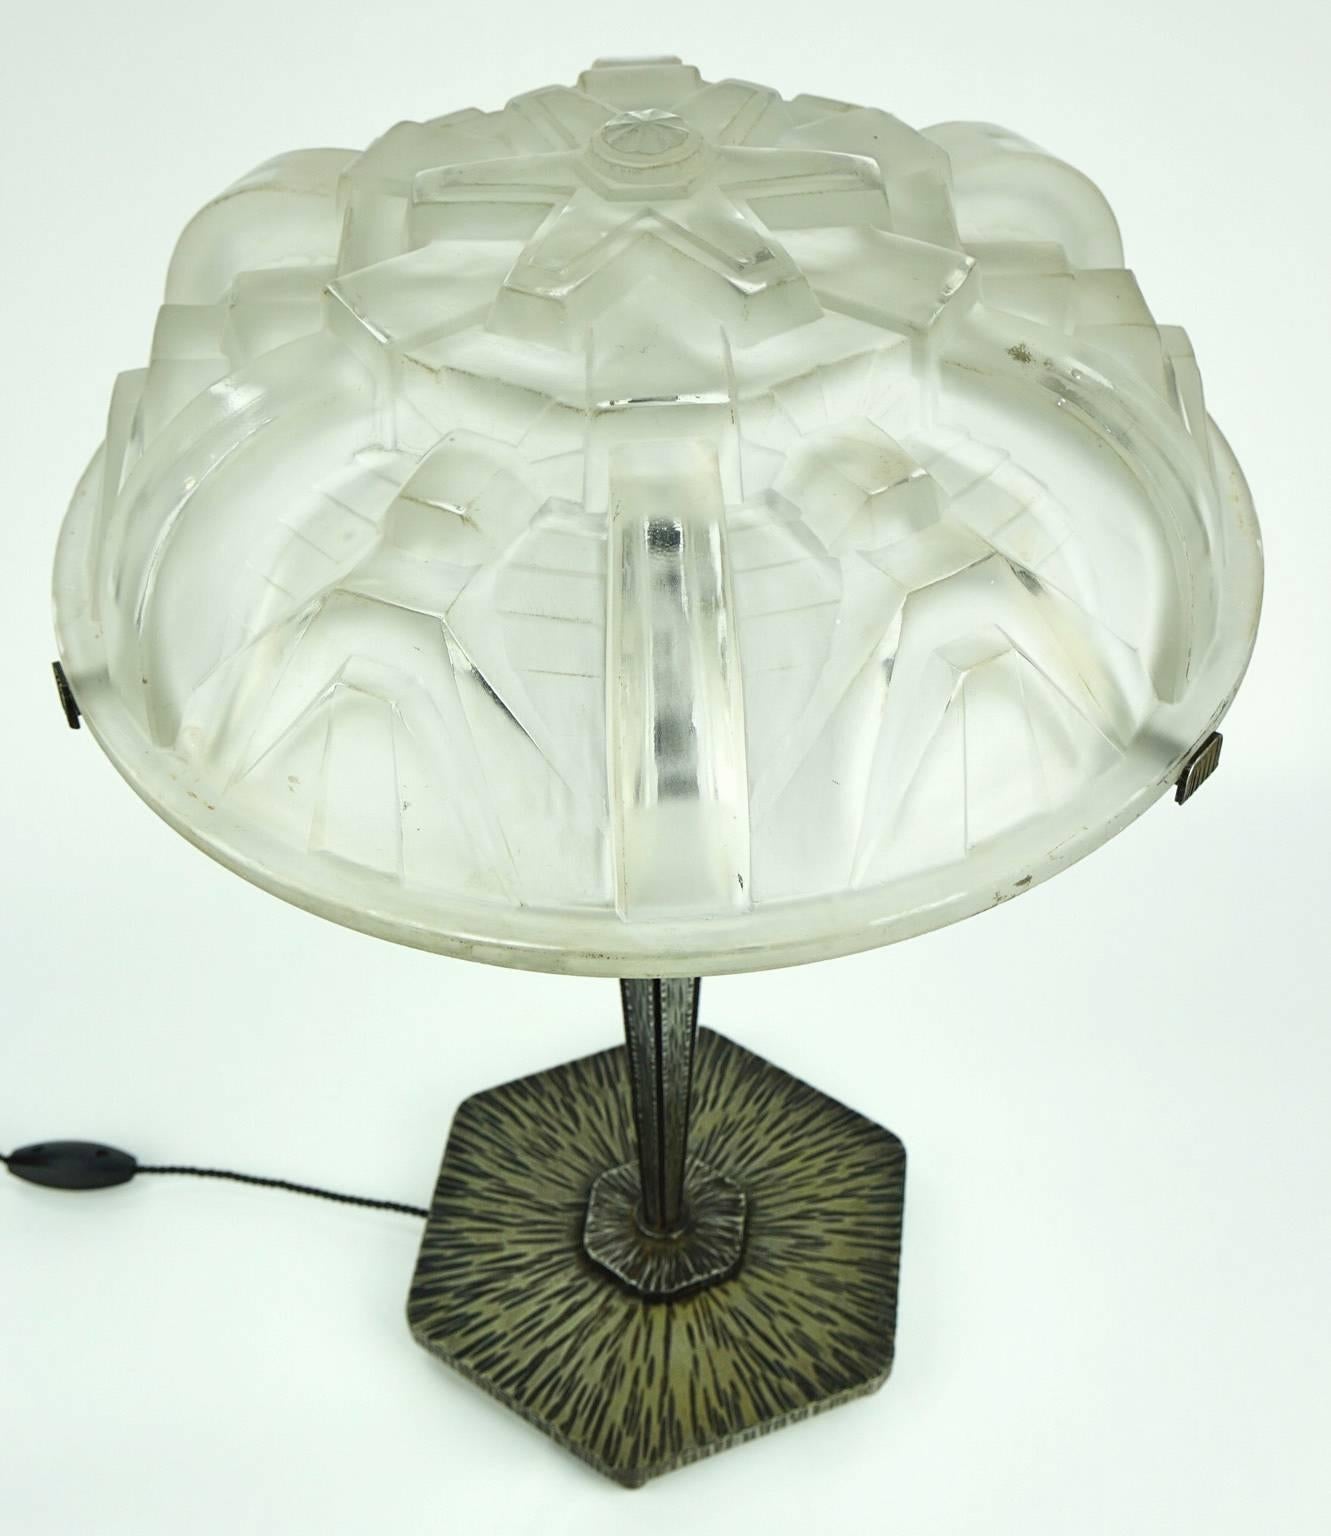 Large Art Deco table lamp by Muller Freres Luneville. The lampshade is removable. Bulb and cables in perfect order.

Size: Top diameter: 35 cm. Base diameter: 19 cm. Height: 50 cm.